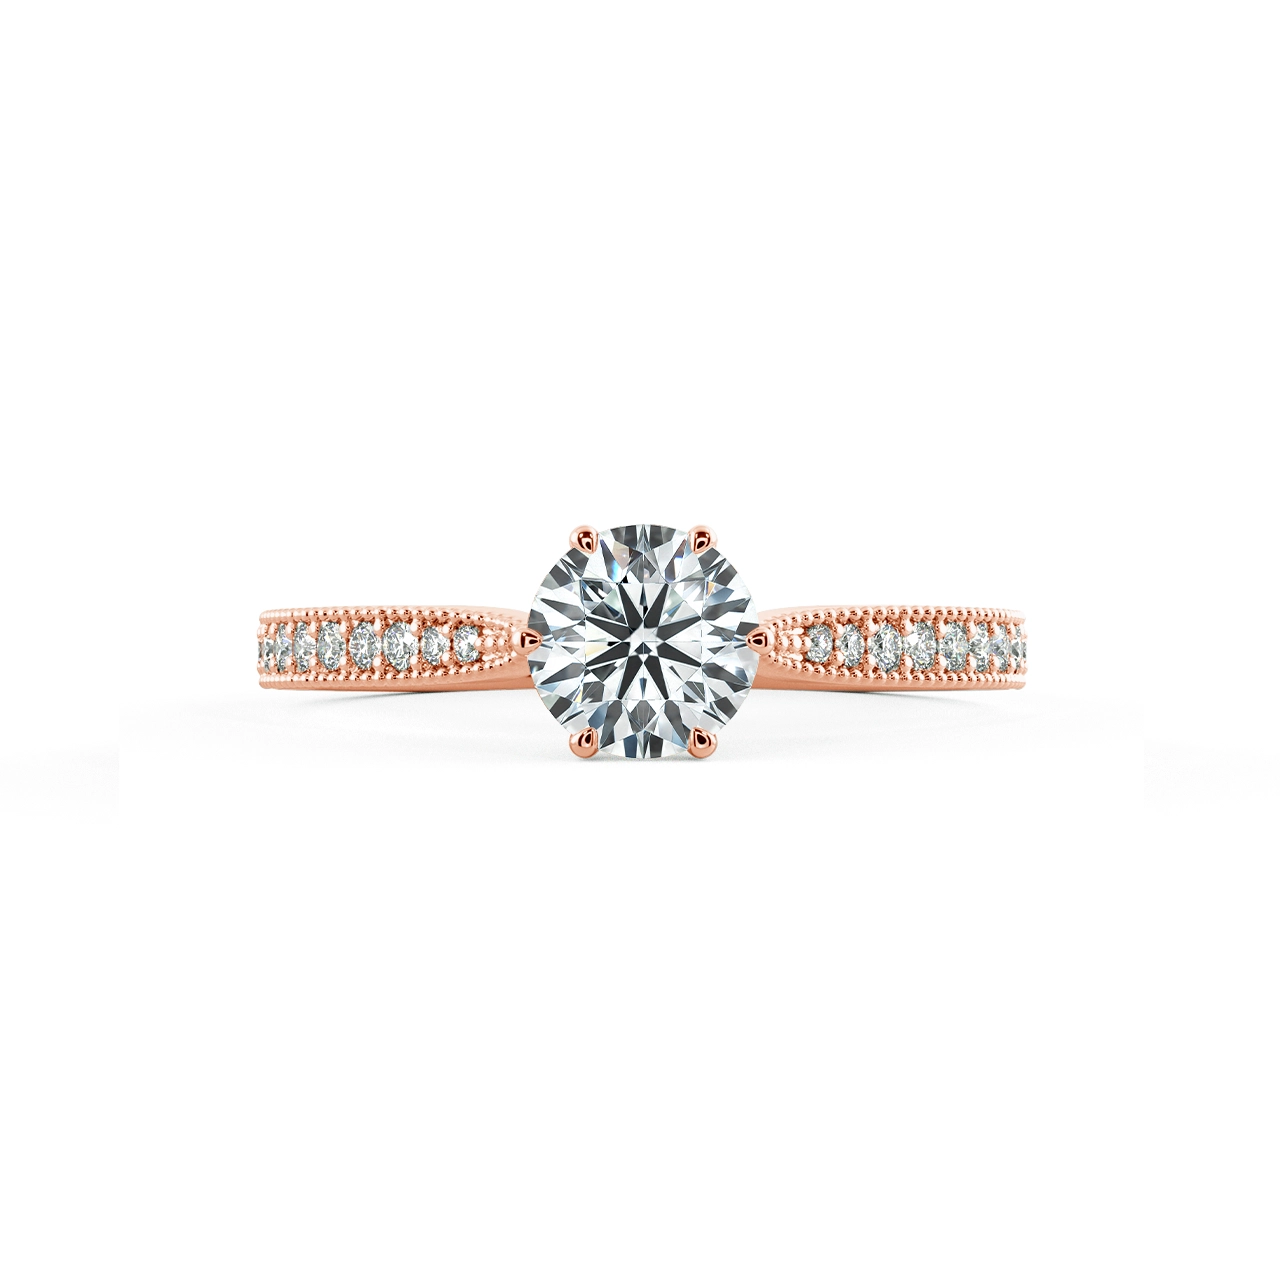 Six Prongs Solitaire Pave Engagement Ring with Milgrain NCH1204 2